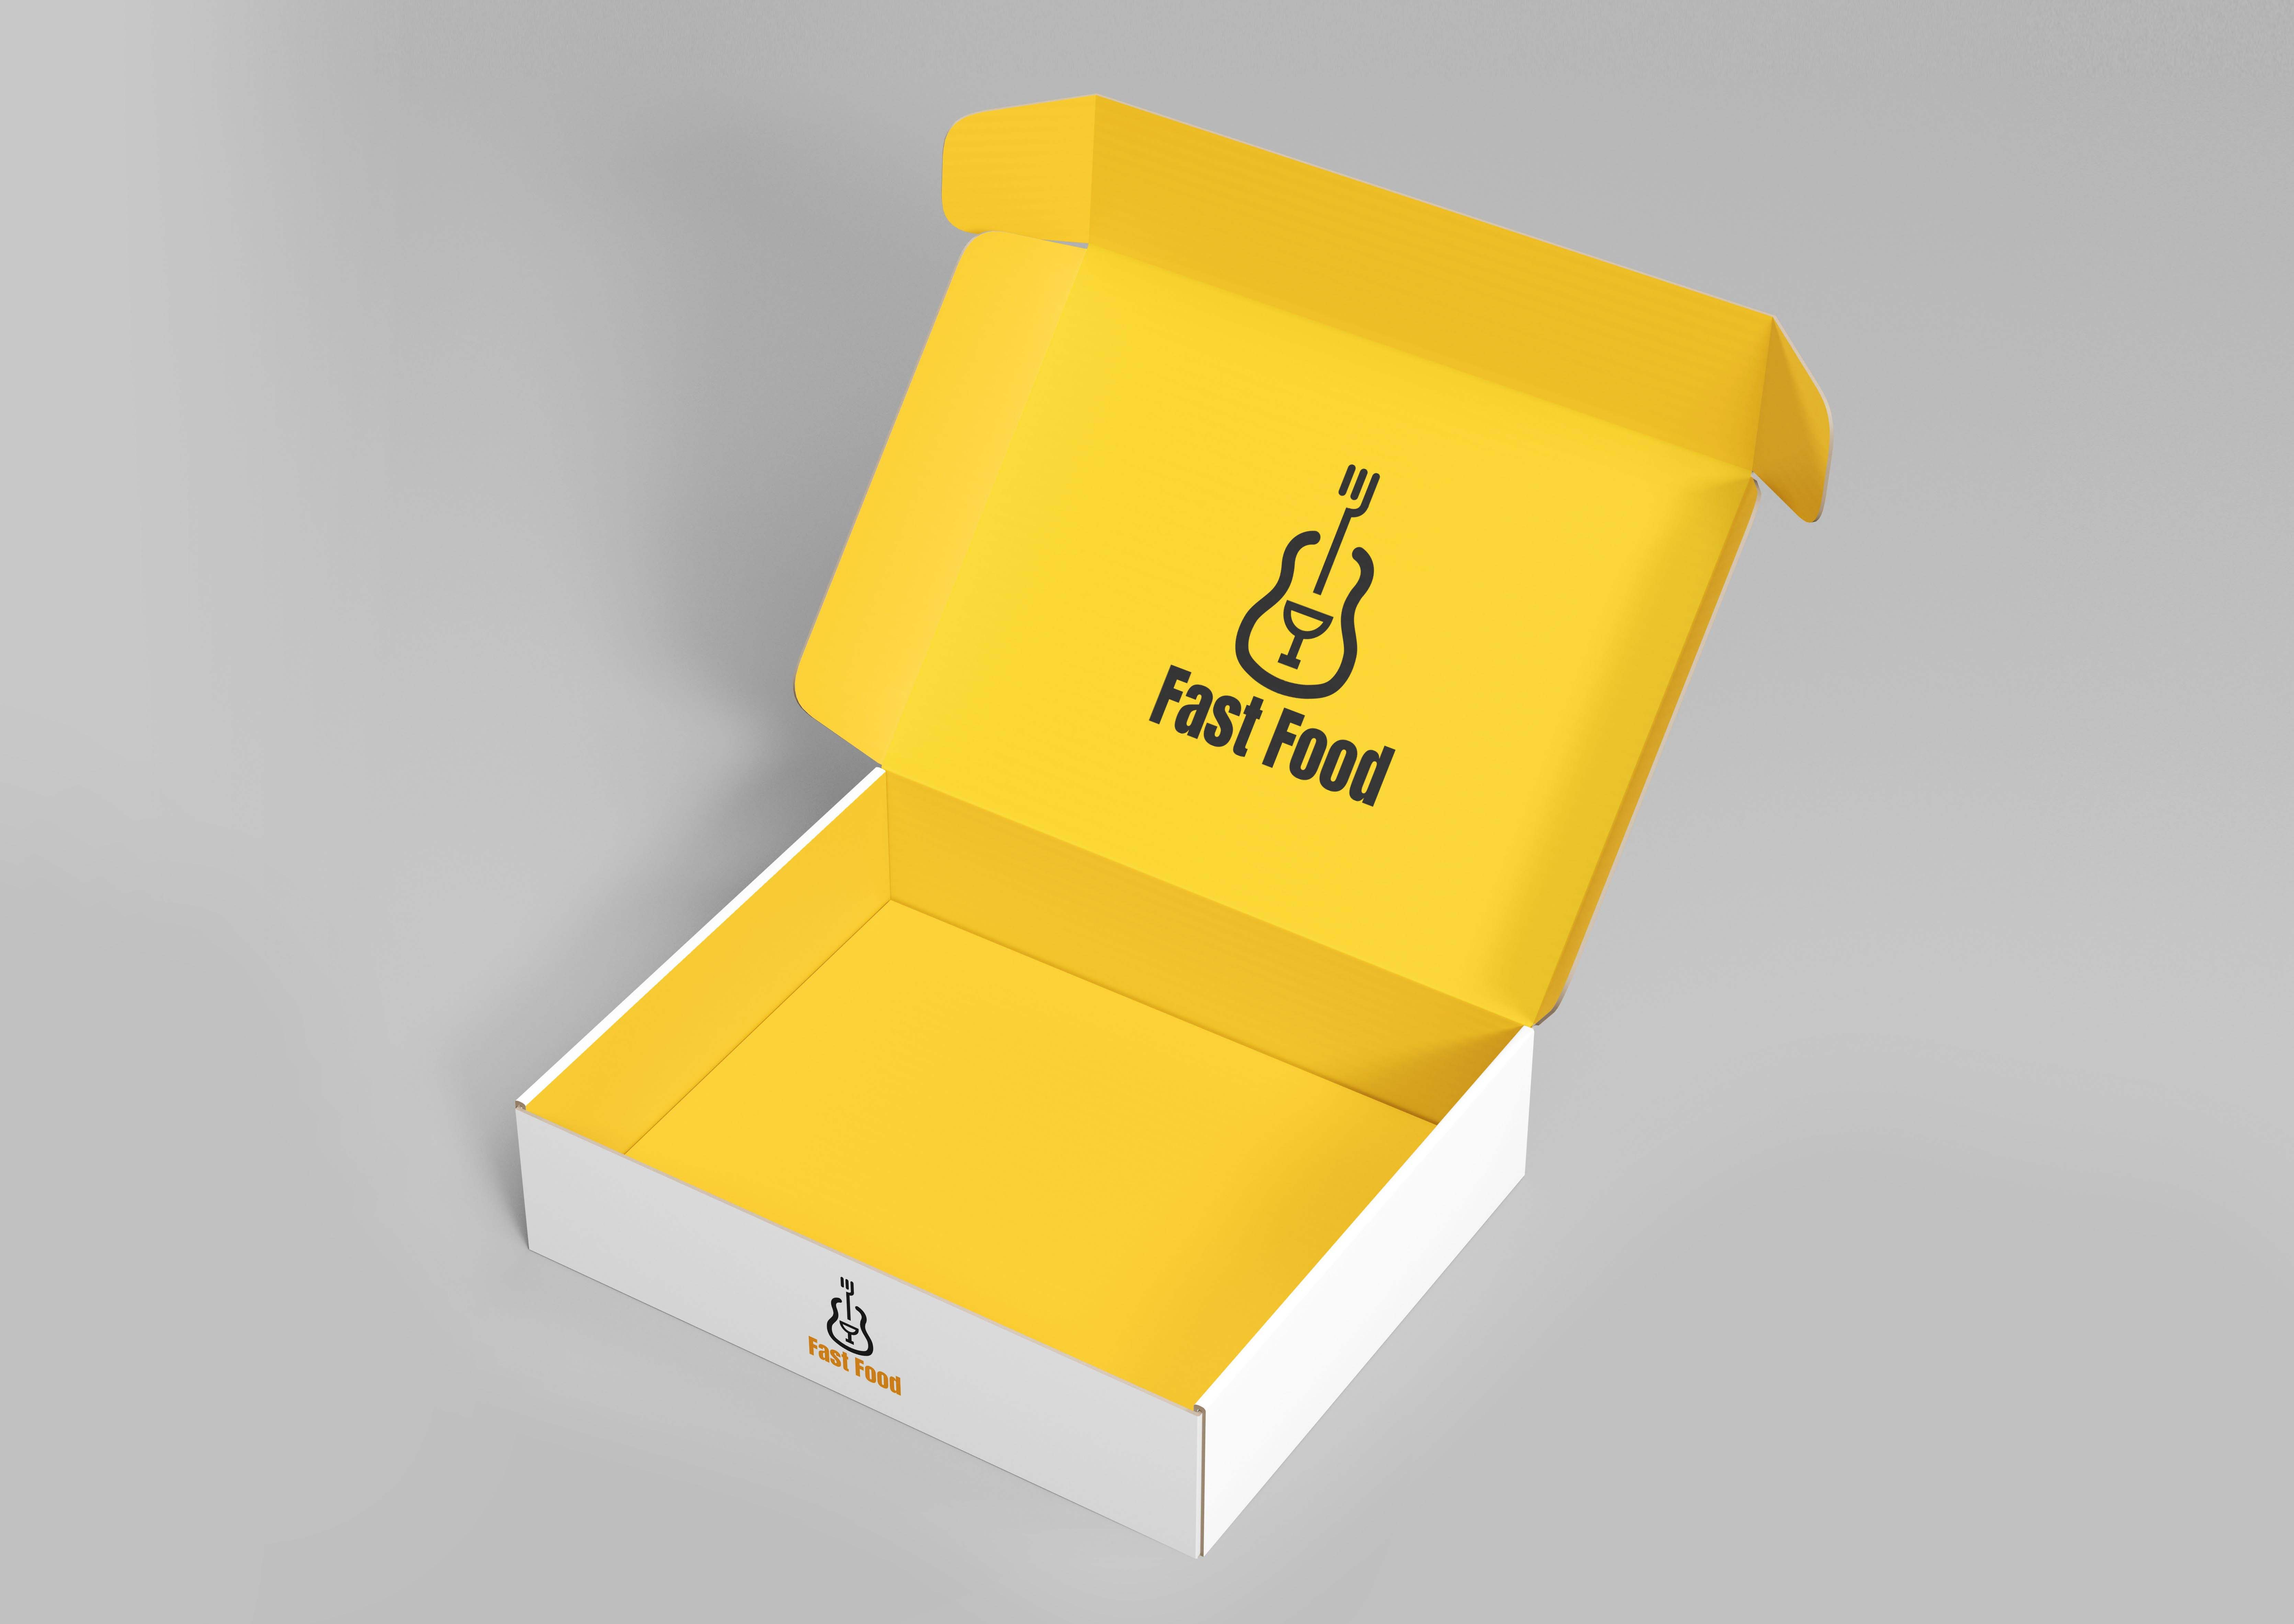 Box mockup example with Fast Food Restaurant Logo.